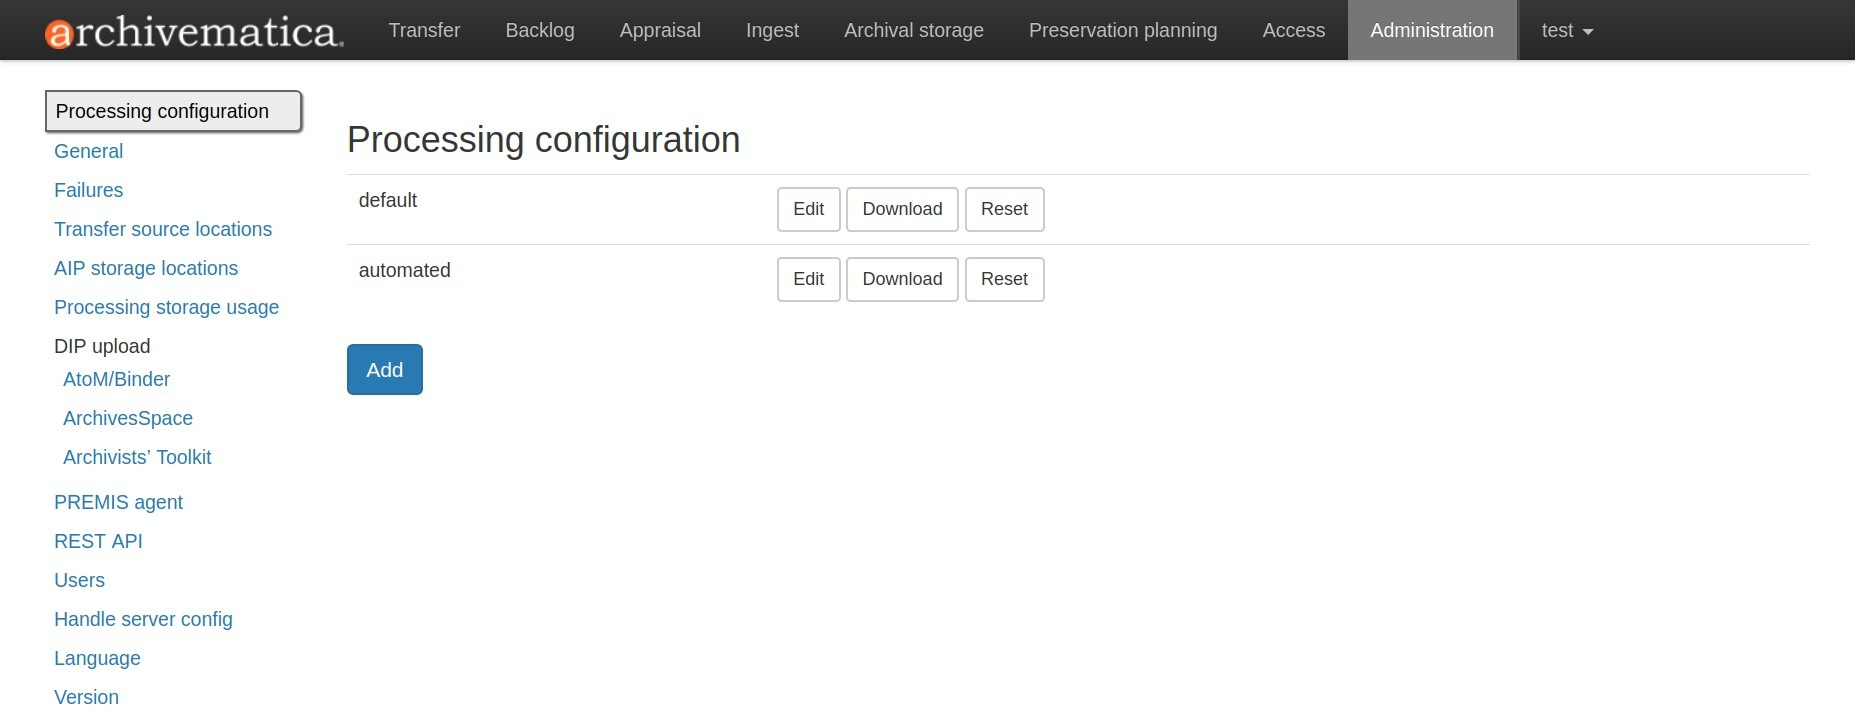 Image showing the processing configuration page in the dashboard